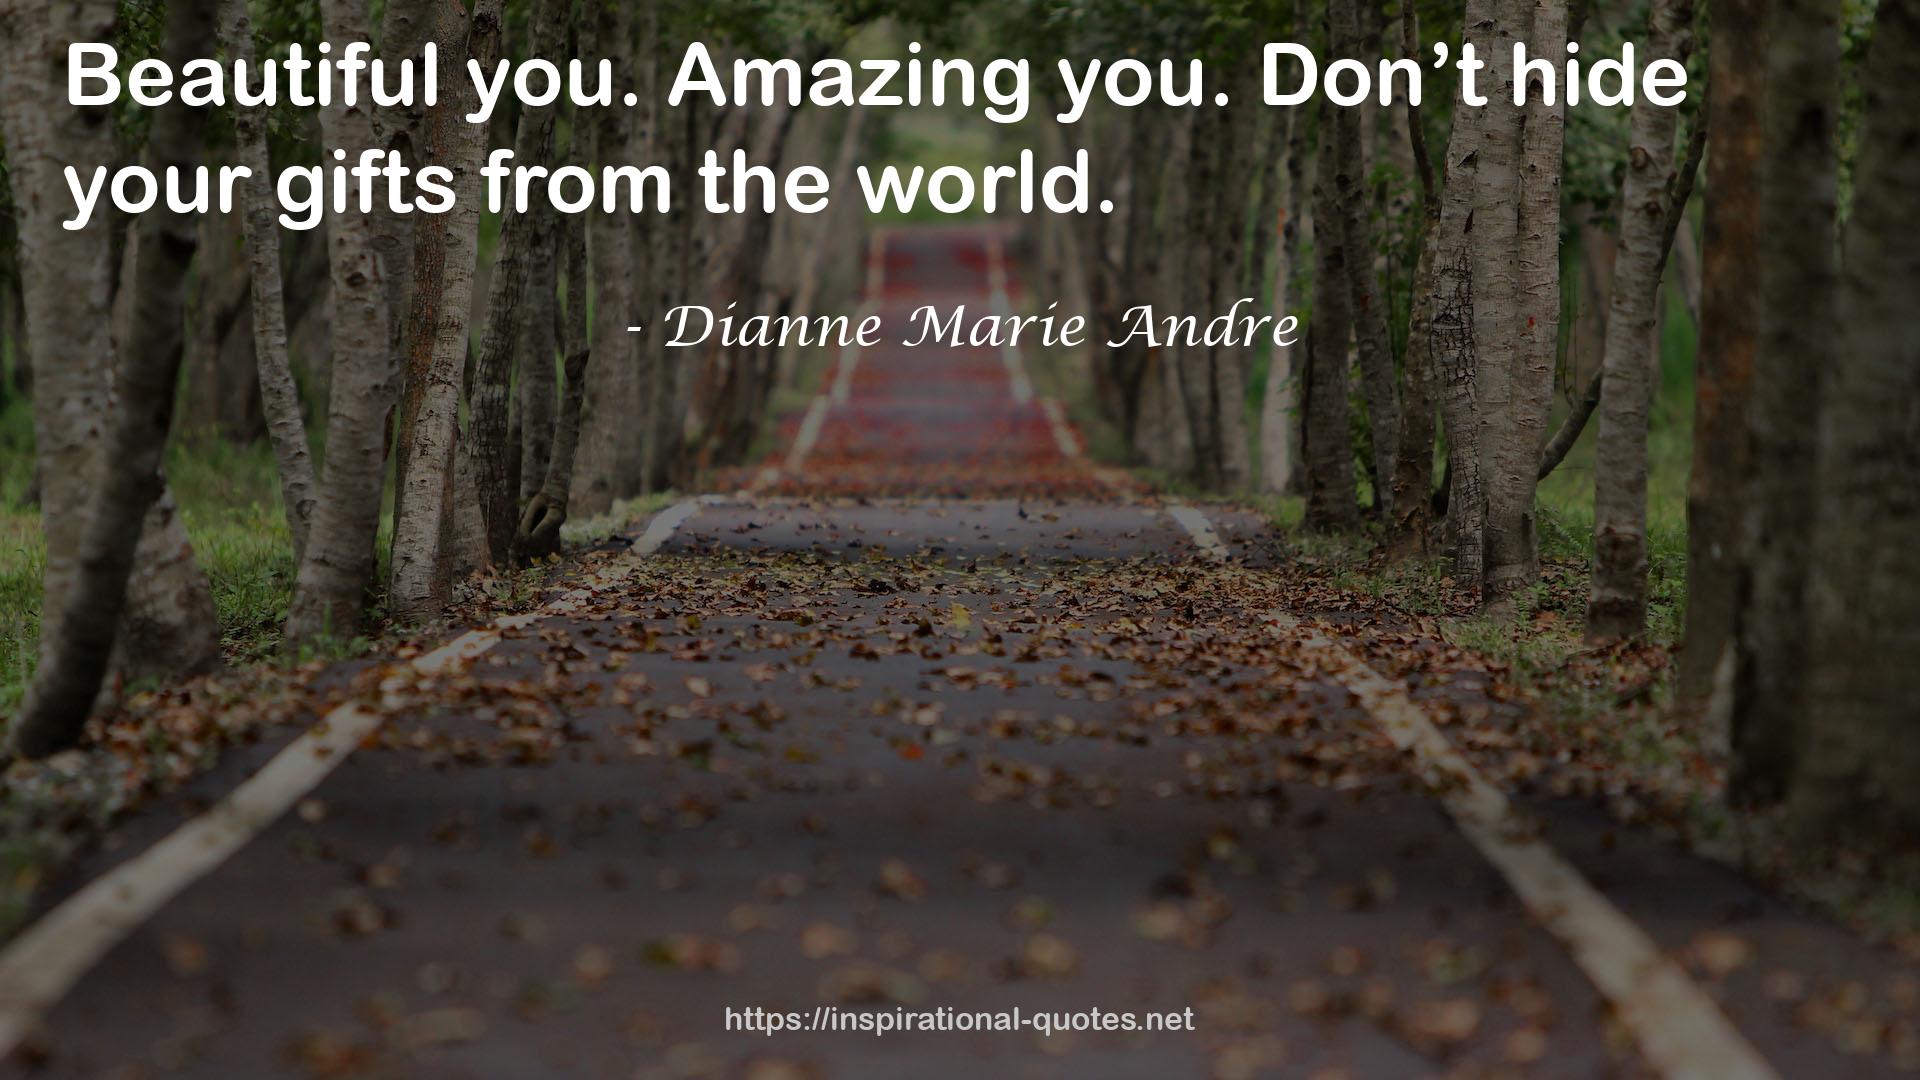 Dianne Marie Andre QUOTES